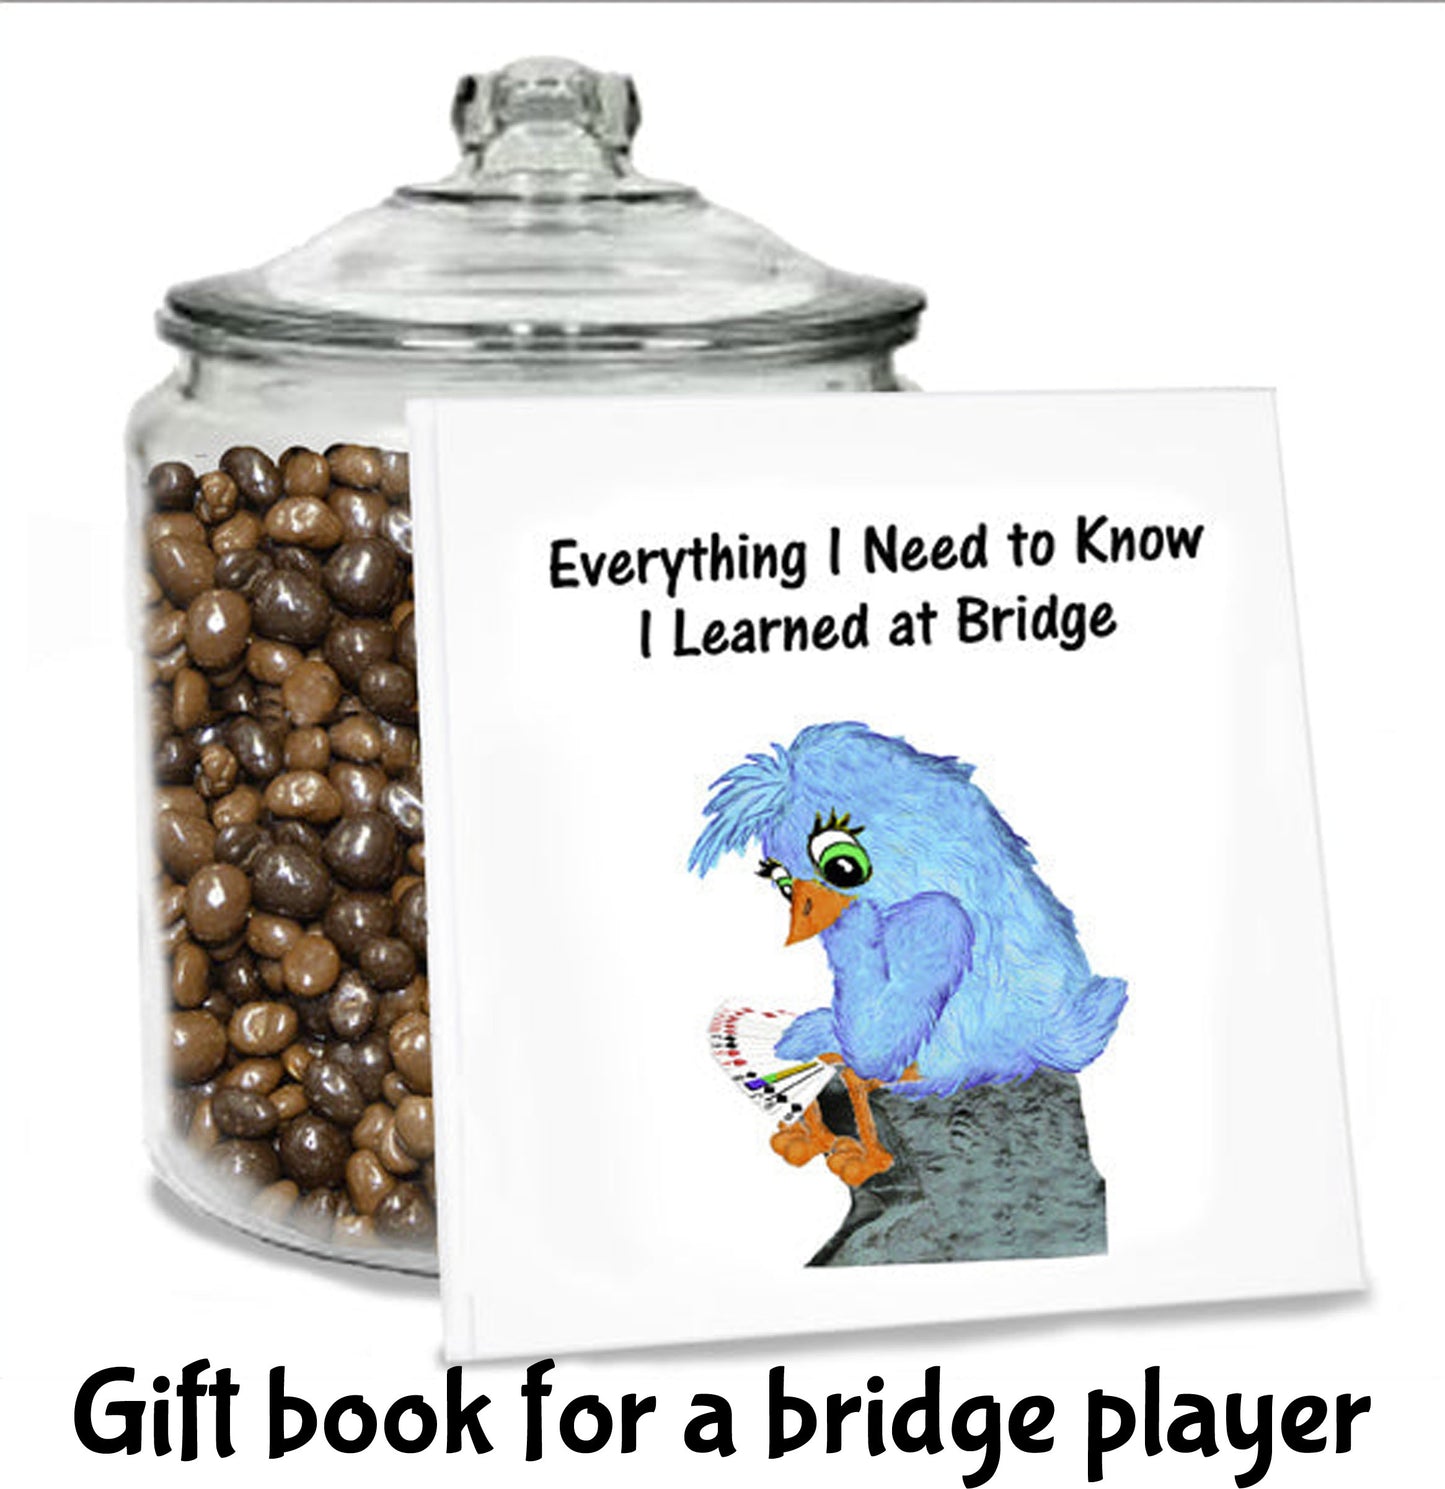 "Everything I Need to Know I Learned at Bridge"